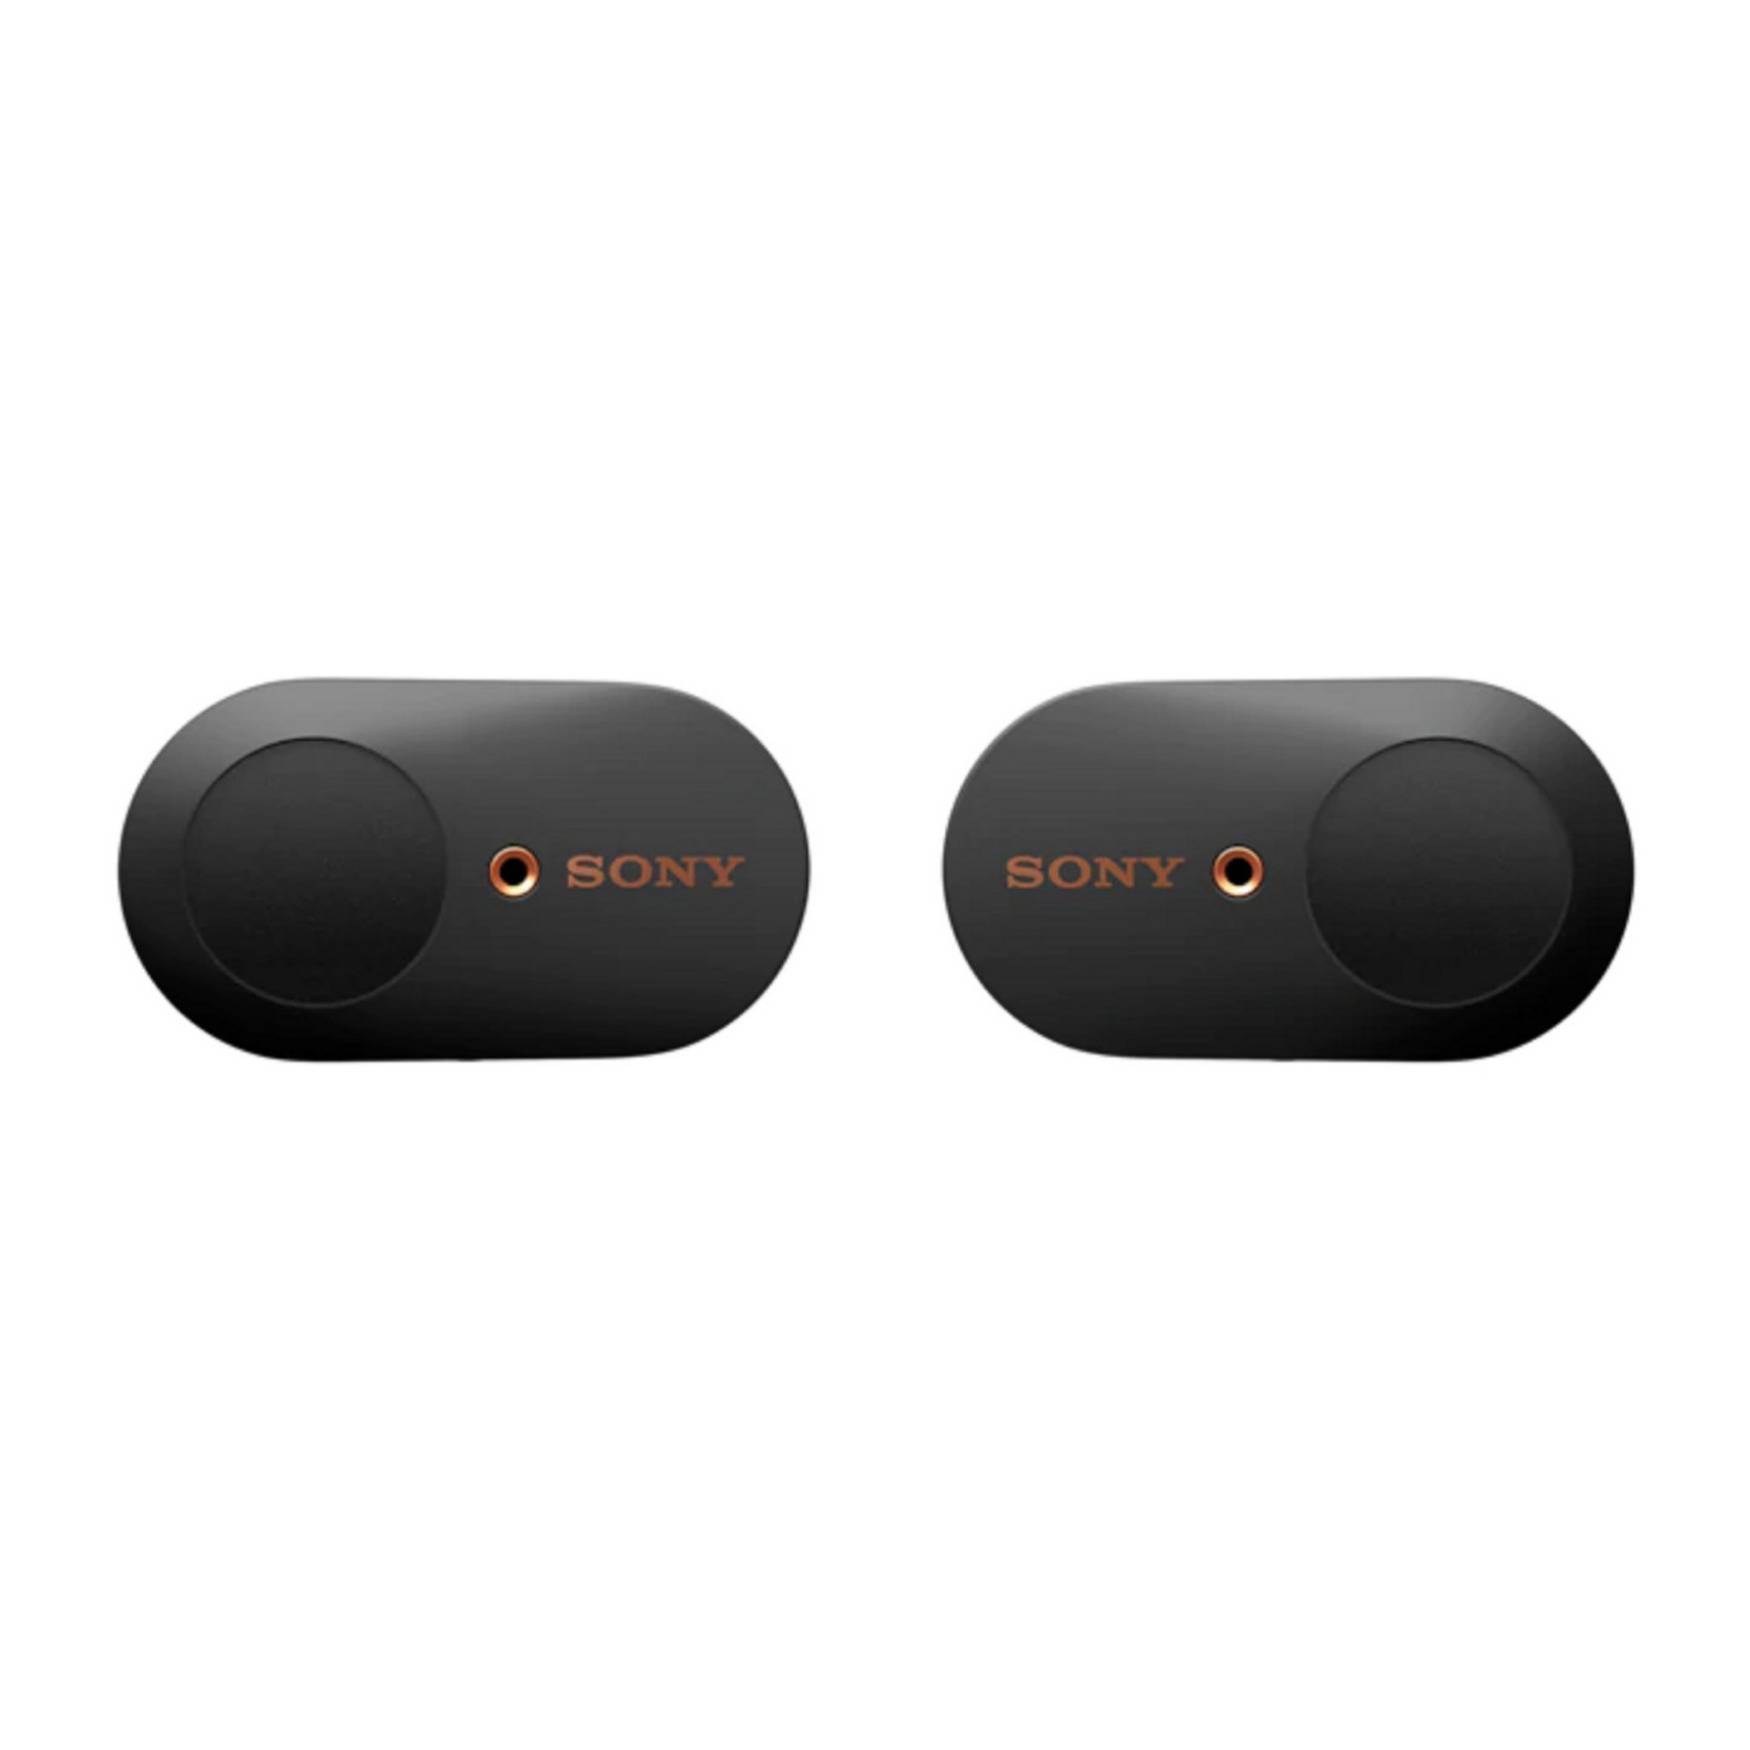 Sony WF-1000XM3 True Wireless Noise-Canceling Earbud Headphones with Charging Case (Black)